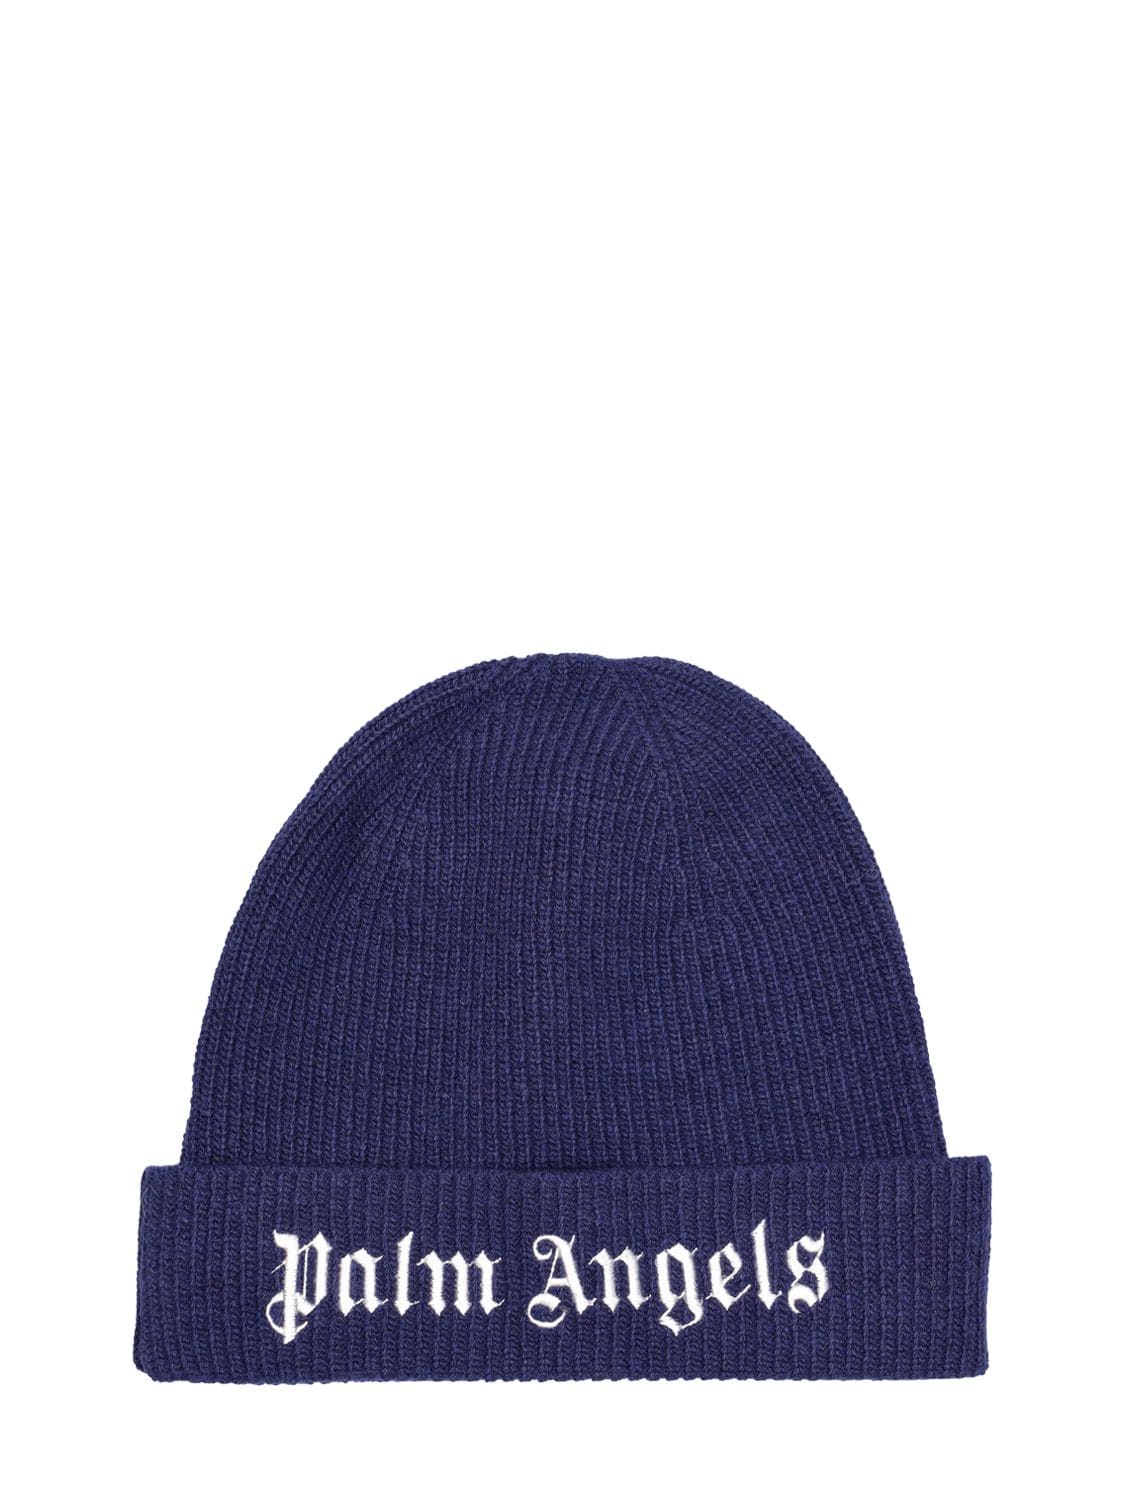 Image of Wool Blend Knit Beanie Hat